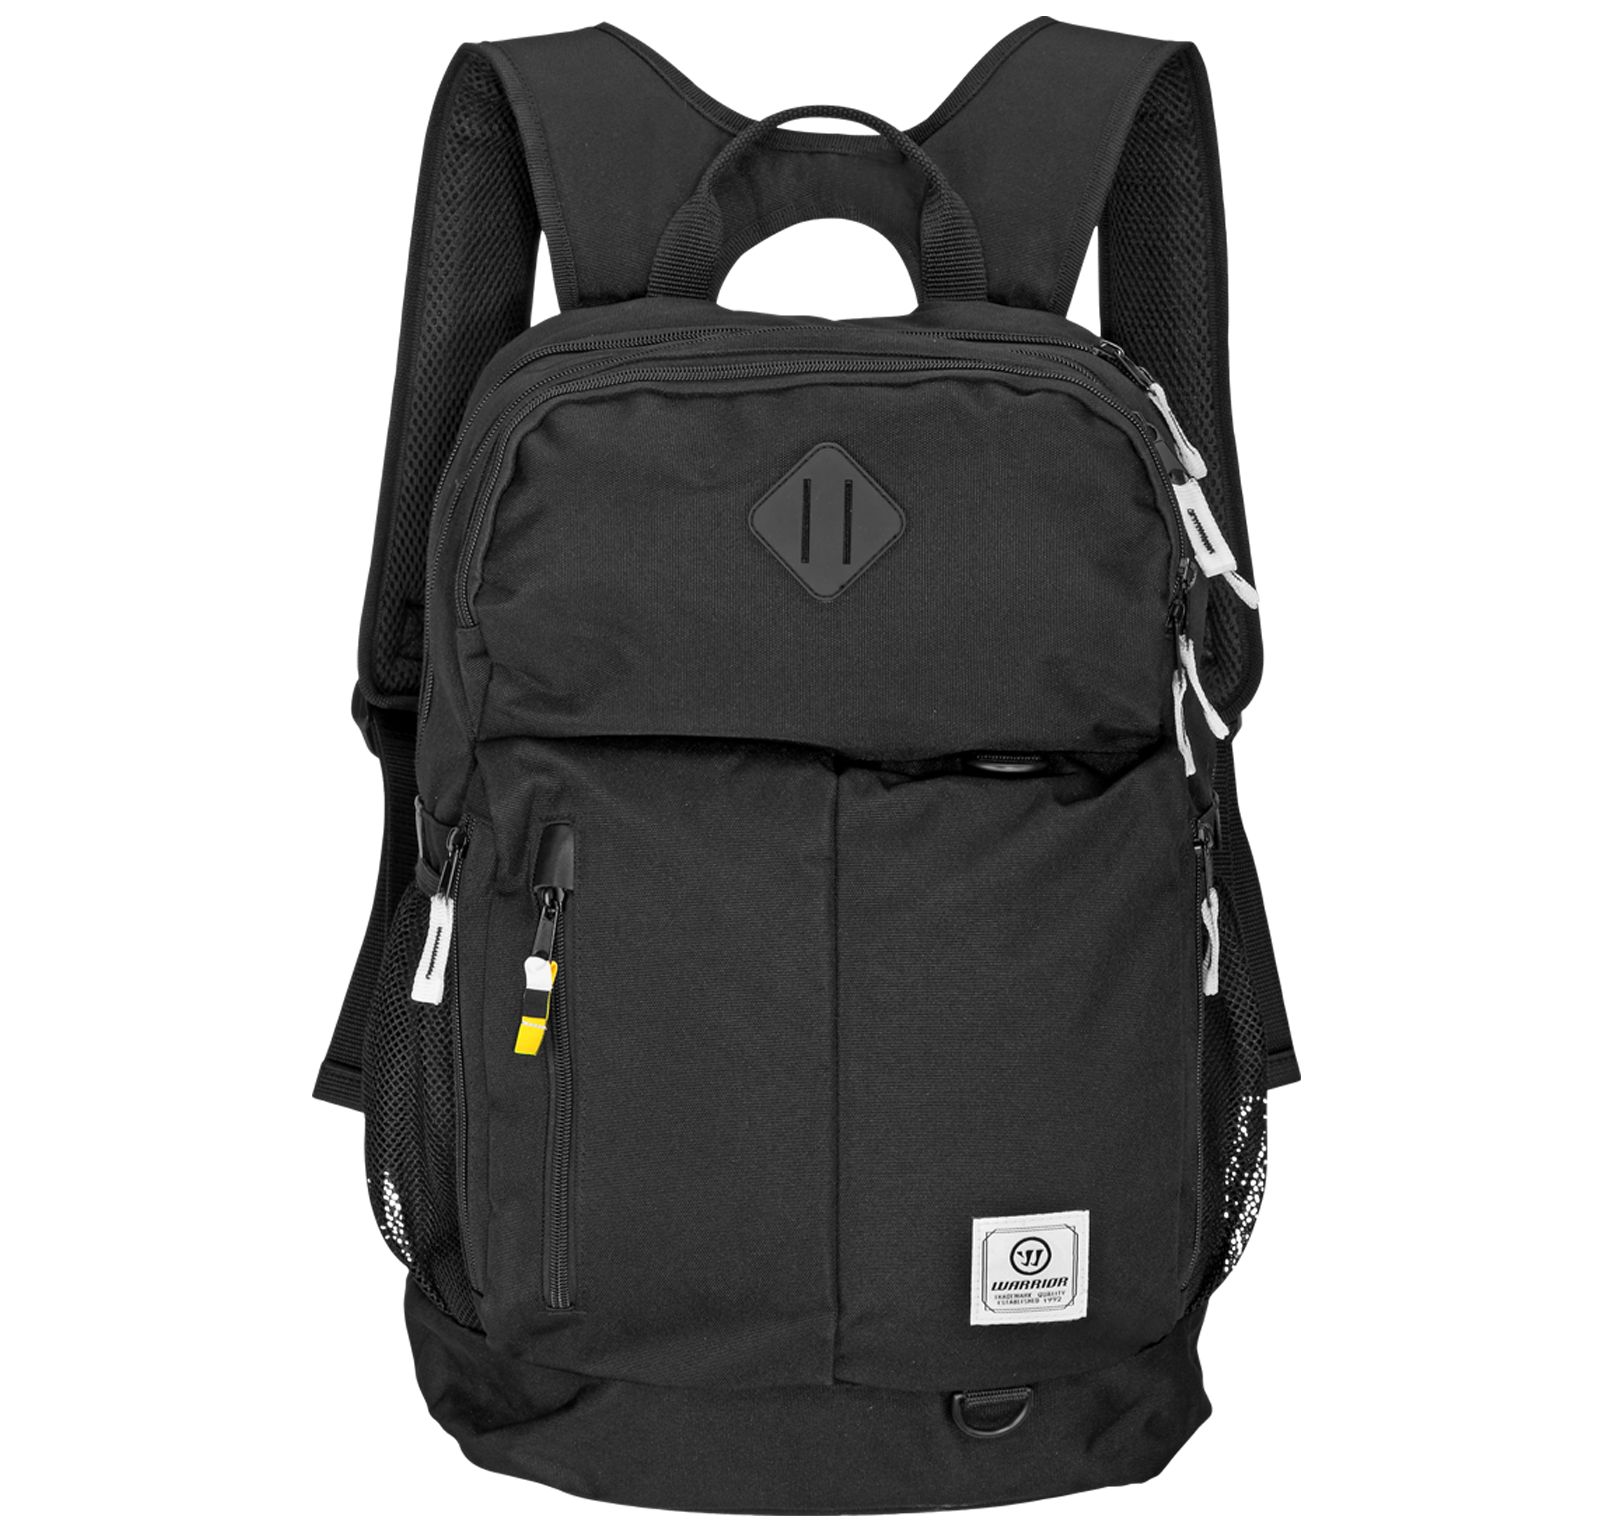 Q10 Day Backpack, Black with Grey image number 0